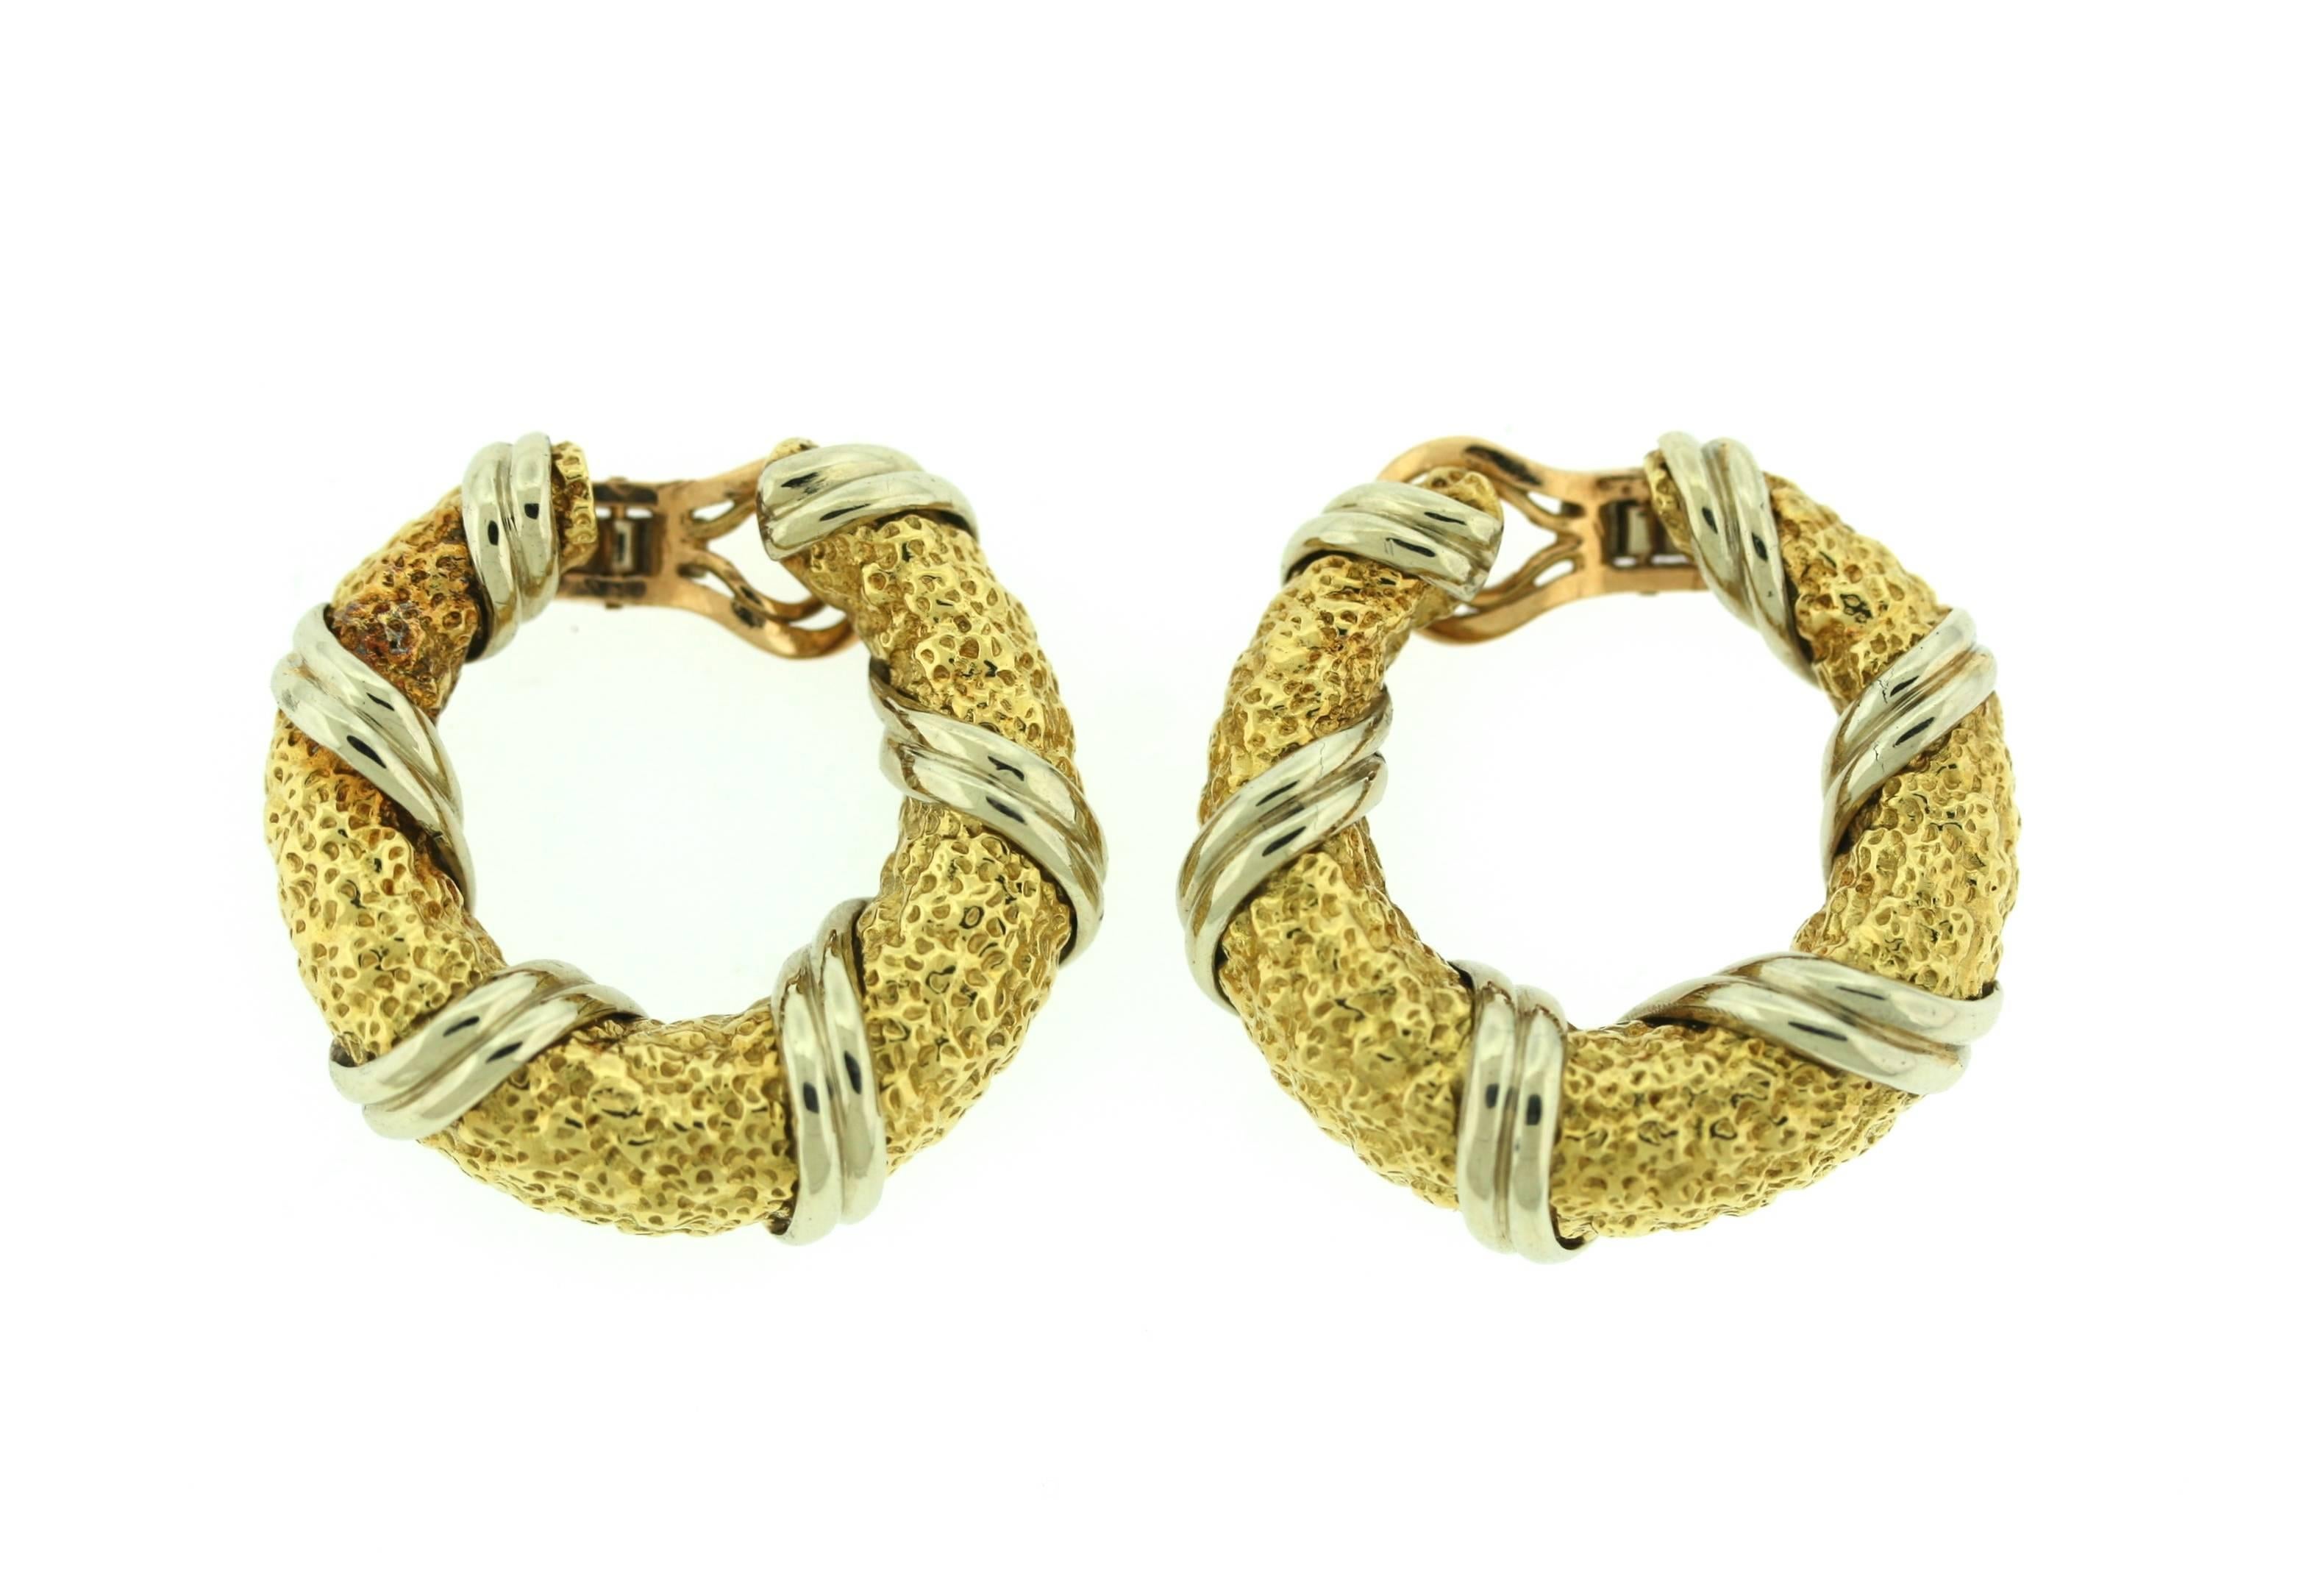 Van Cleef & Arpels Gold Hoop Earrings In Excellent Condition For Sale In New York, NY